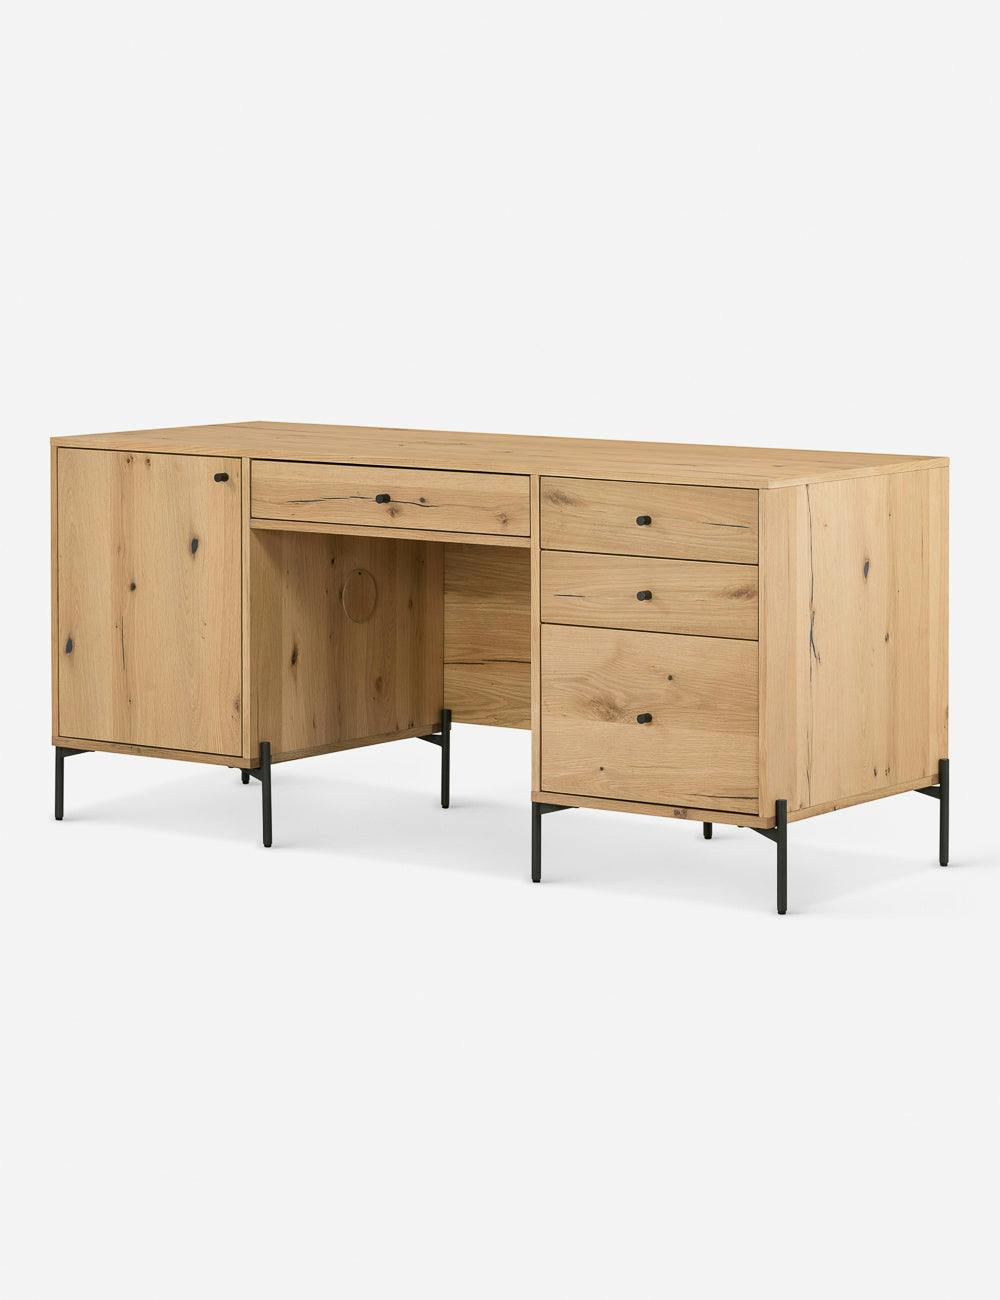 Sumner Contemporary Light Oak Resin Executive Desk with Drawers